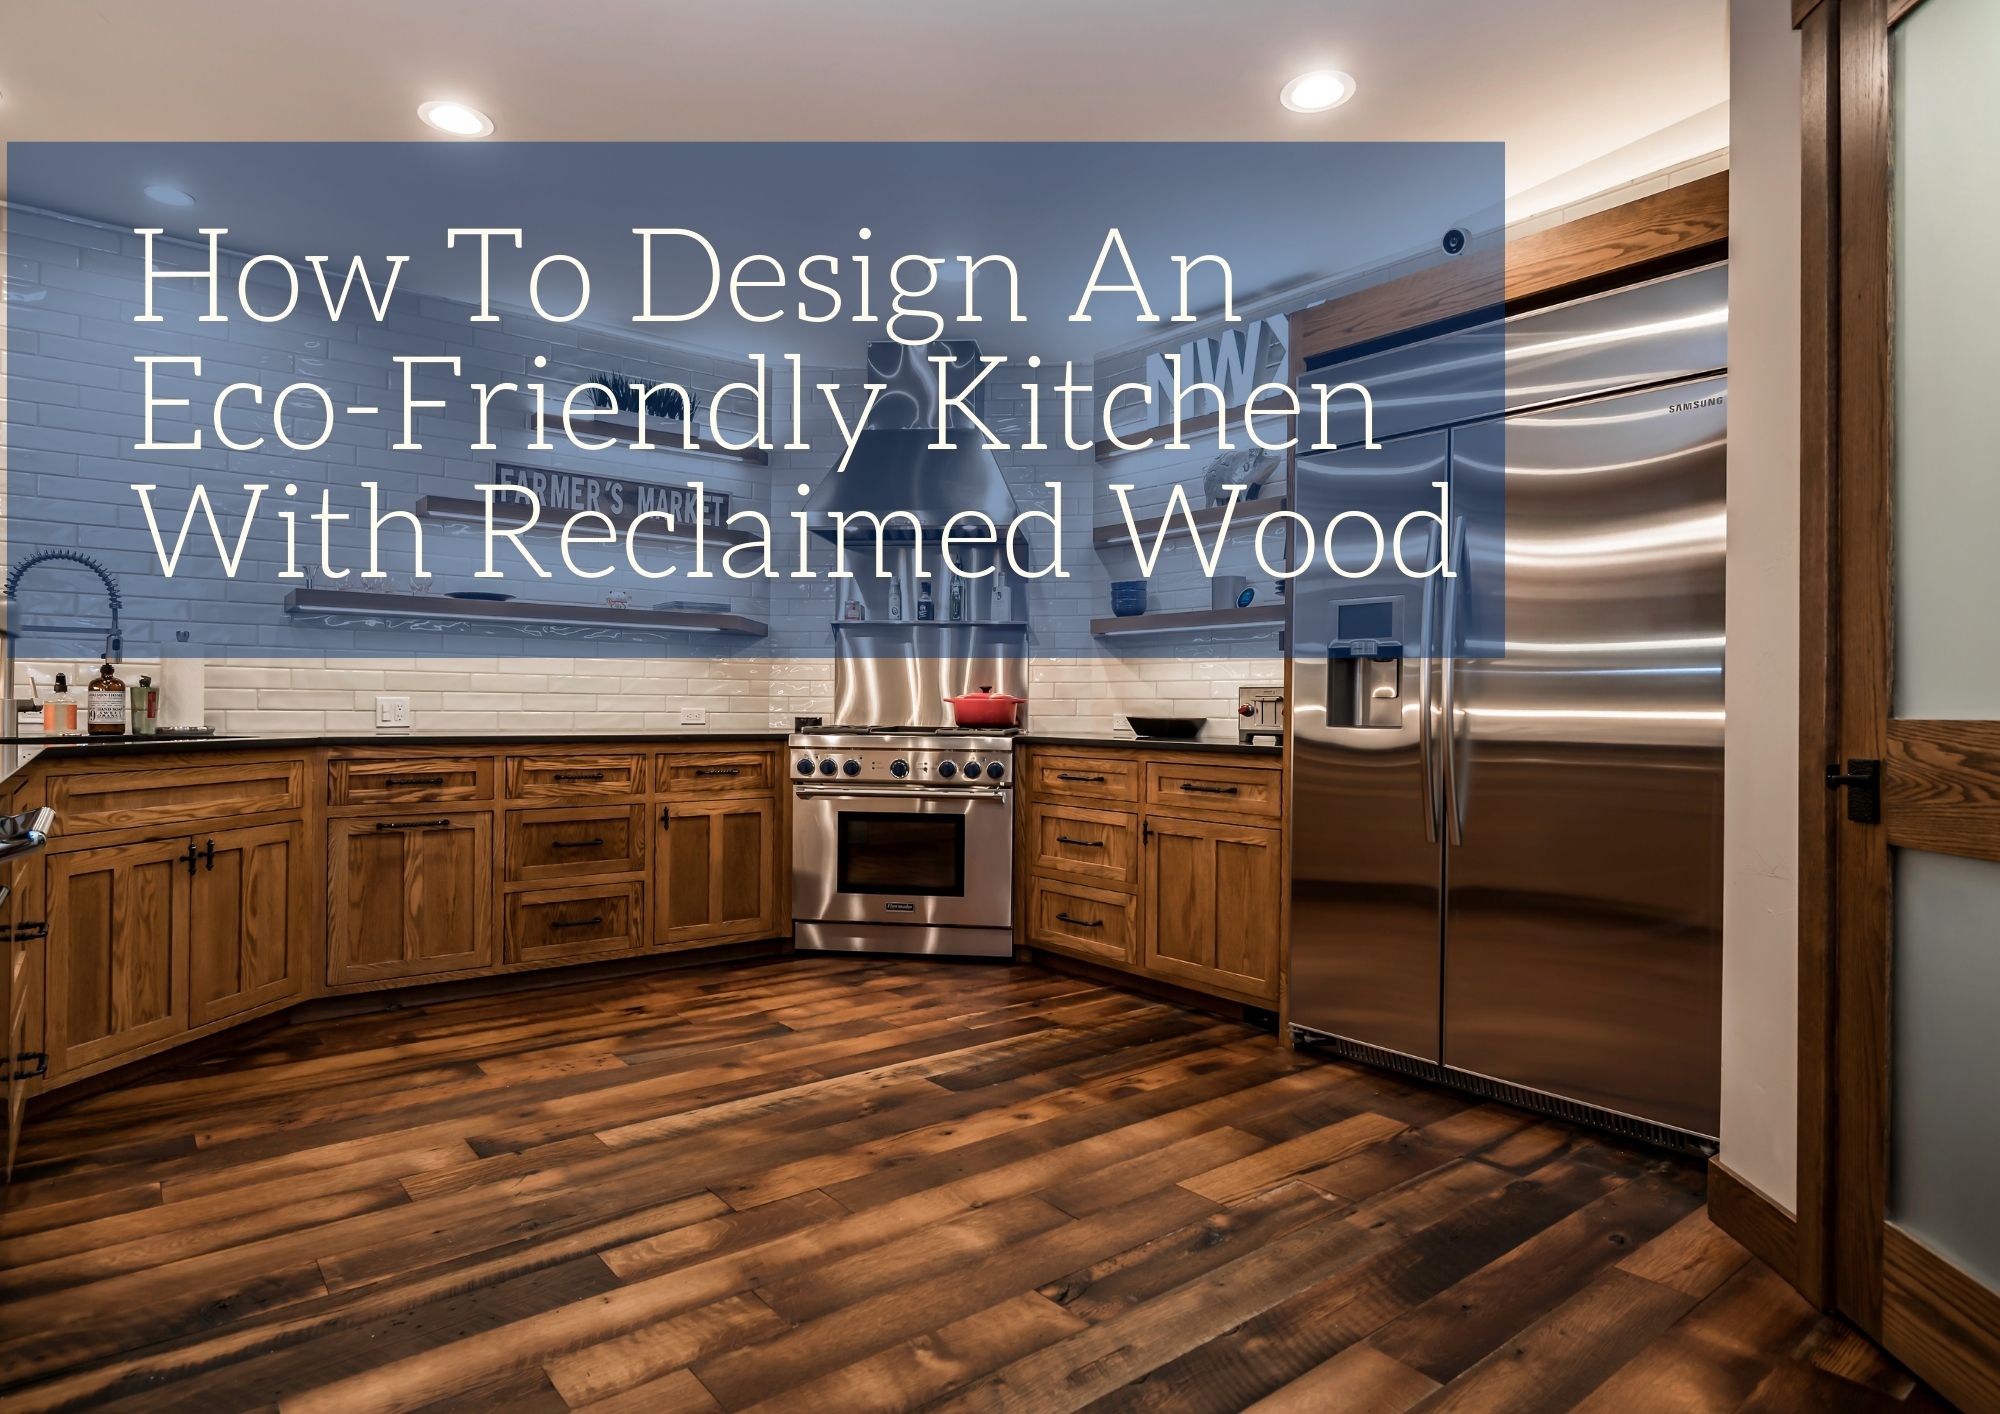 How To Design An Eco-Friendly Kitchen With Reclaimed Wood